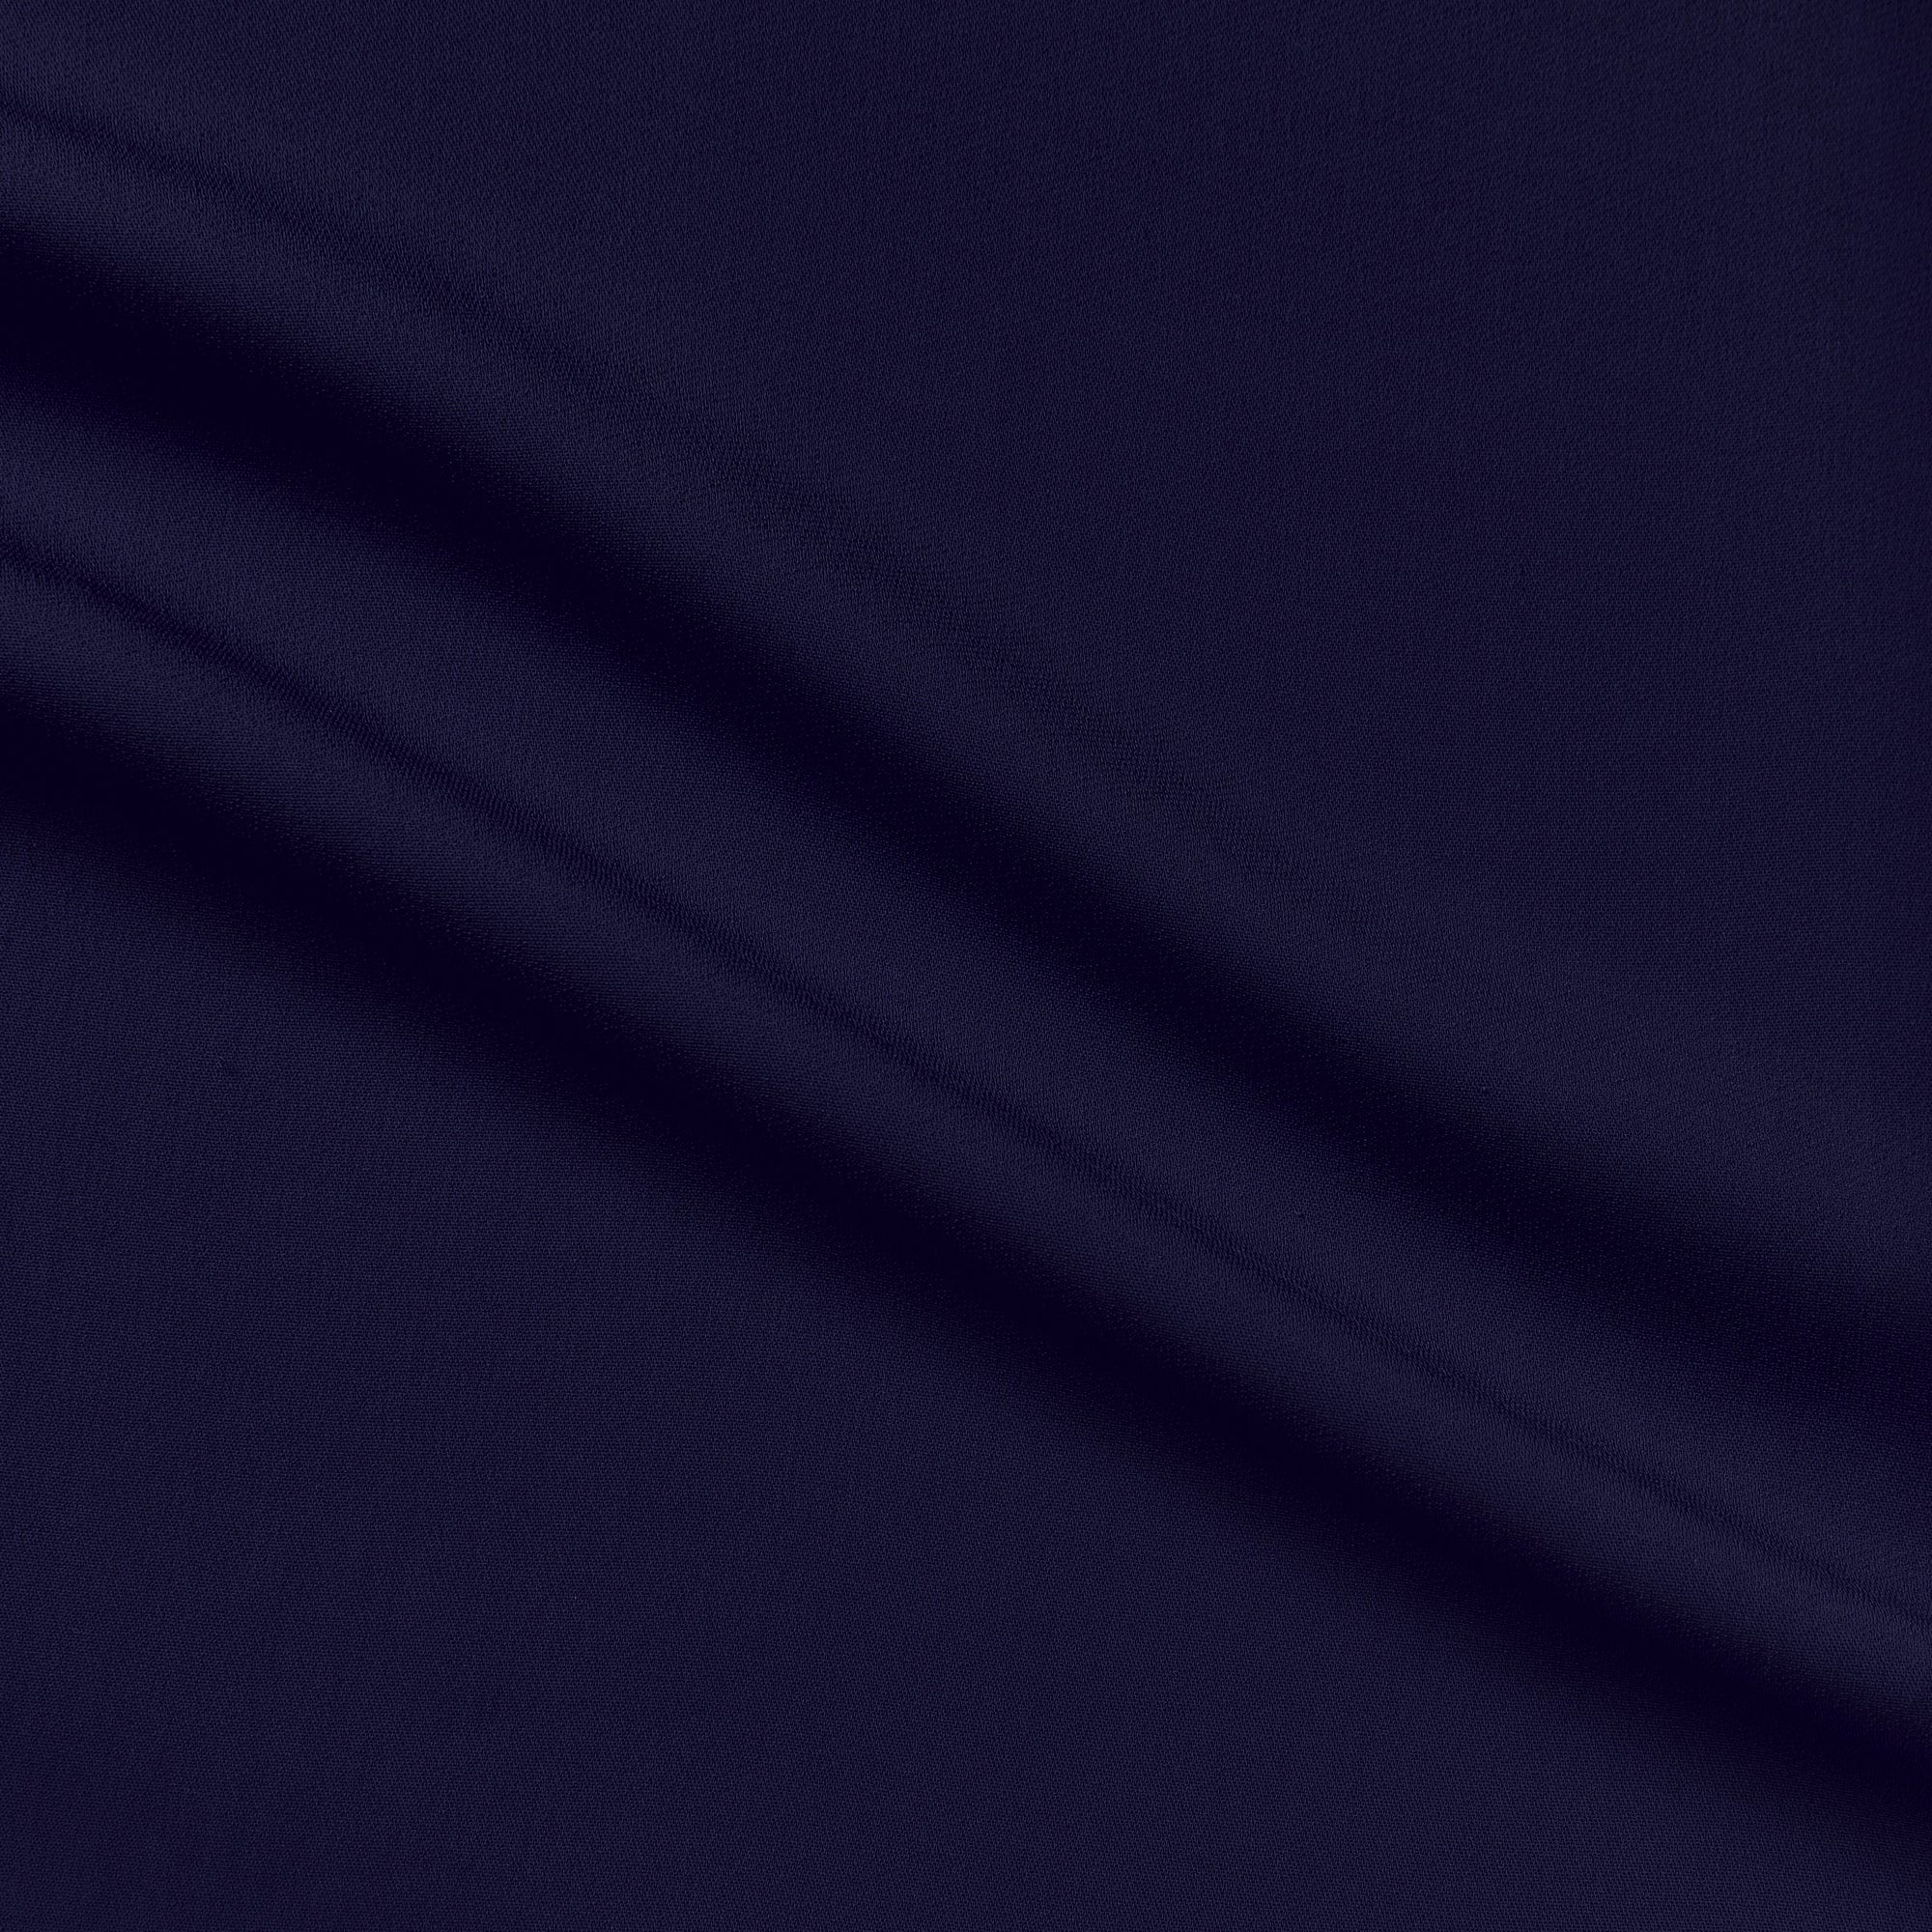 imagine displaying the navy color variant of a stretch mid weight viscose and lycra with a natural silk like sheen and good drape